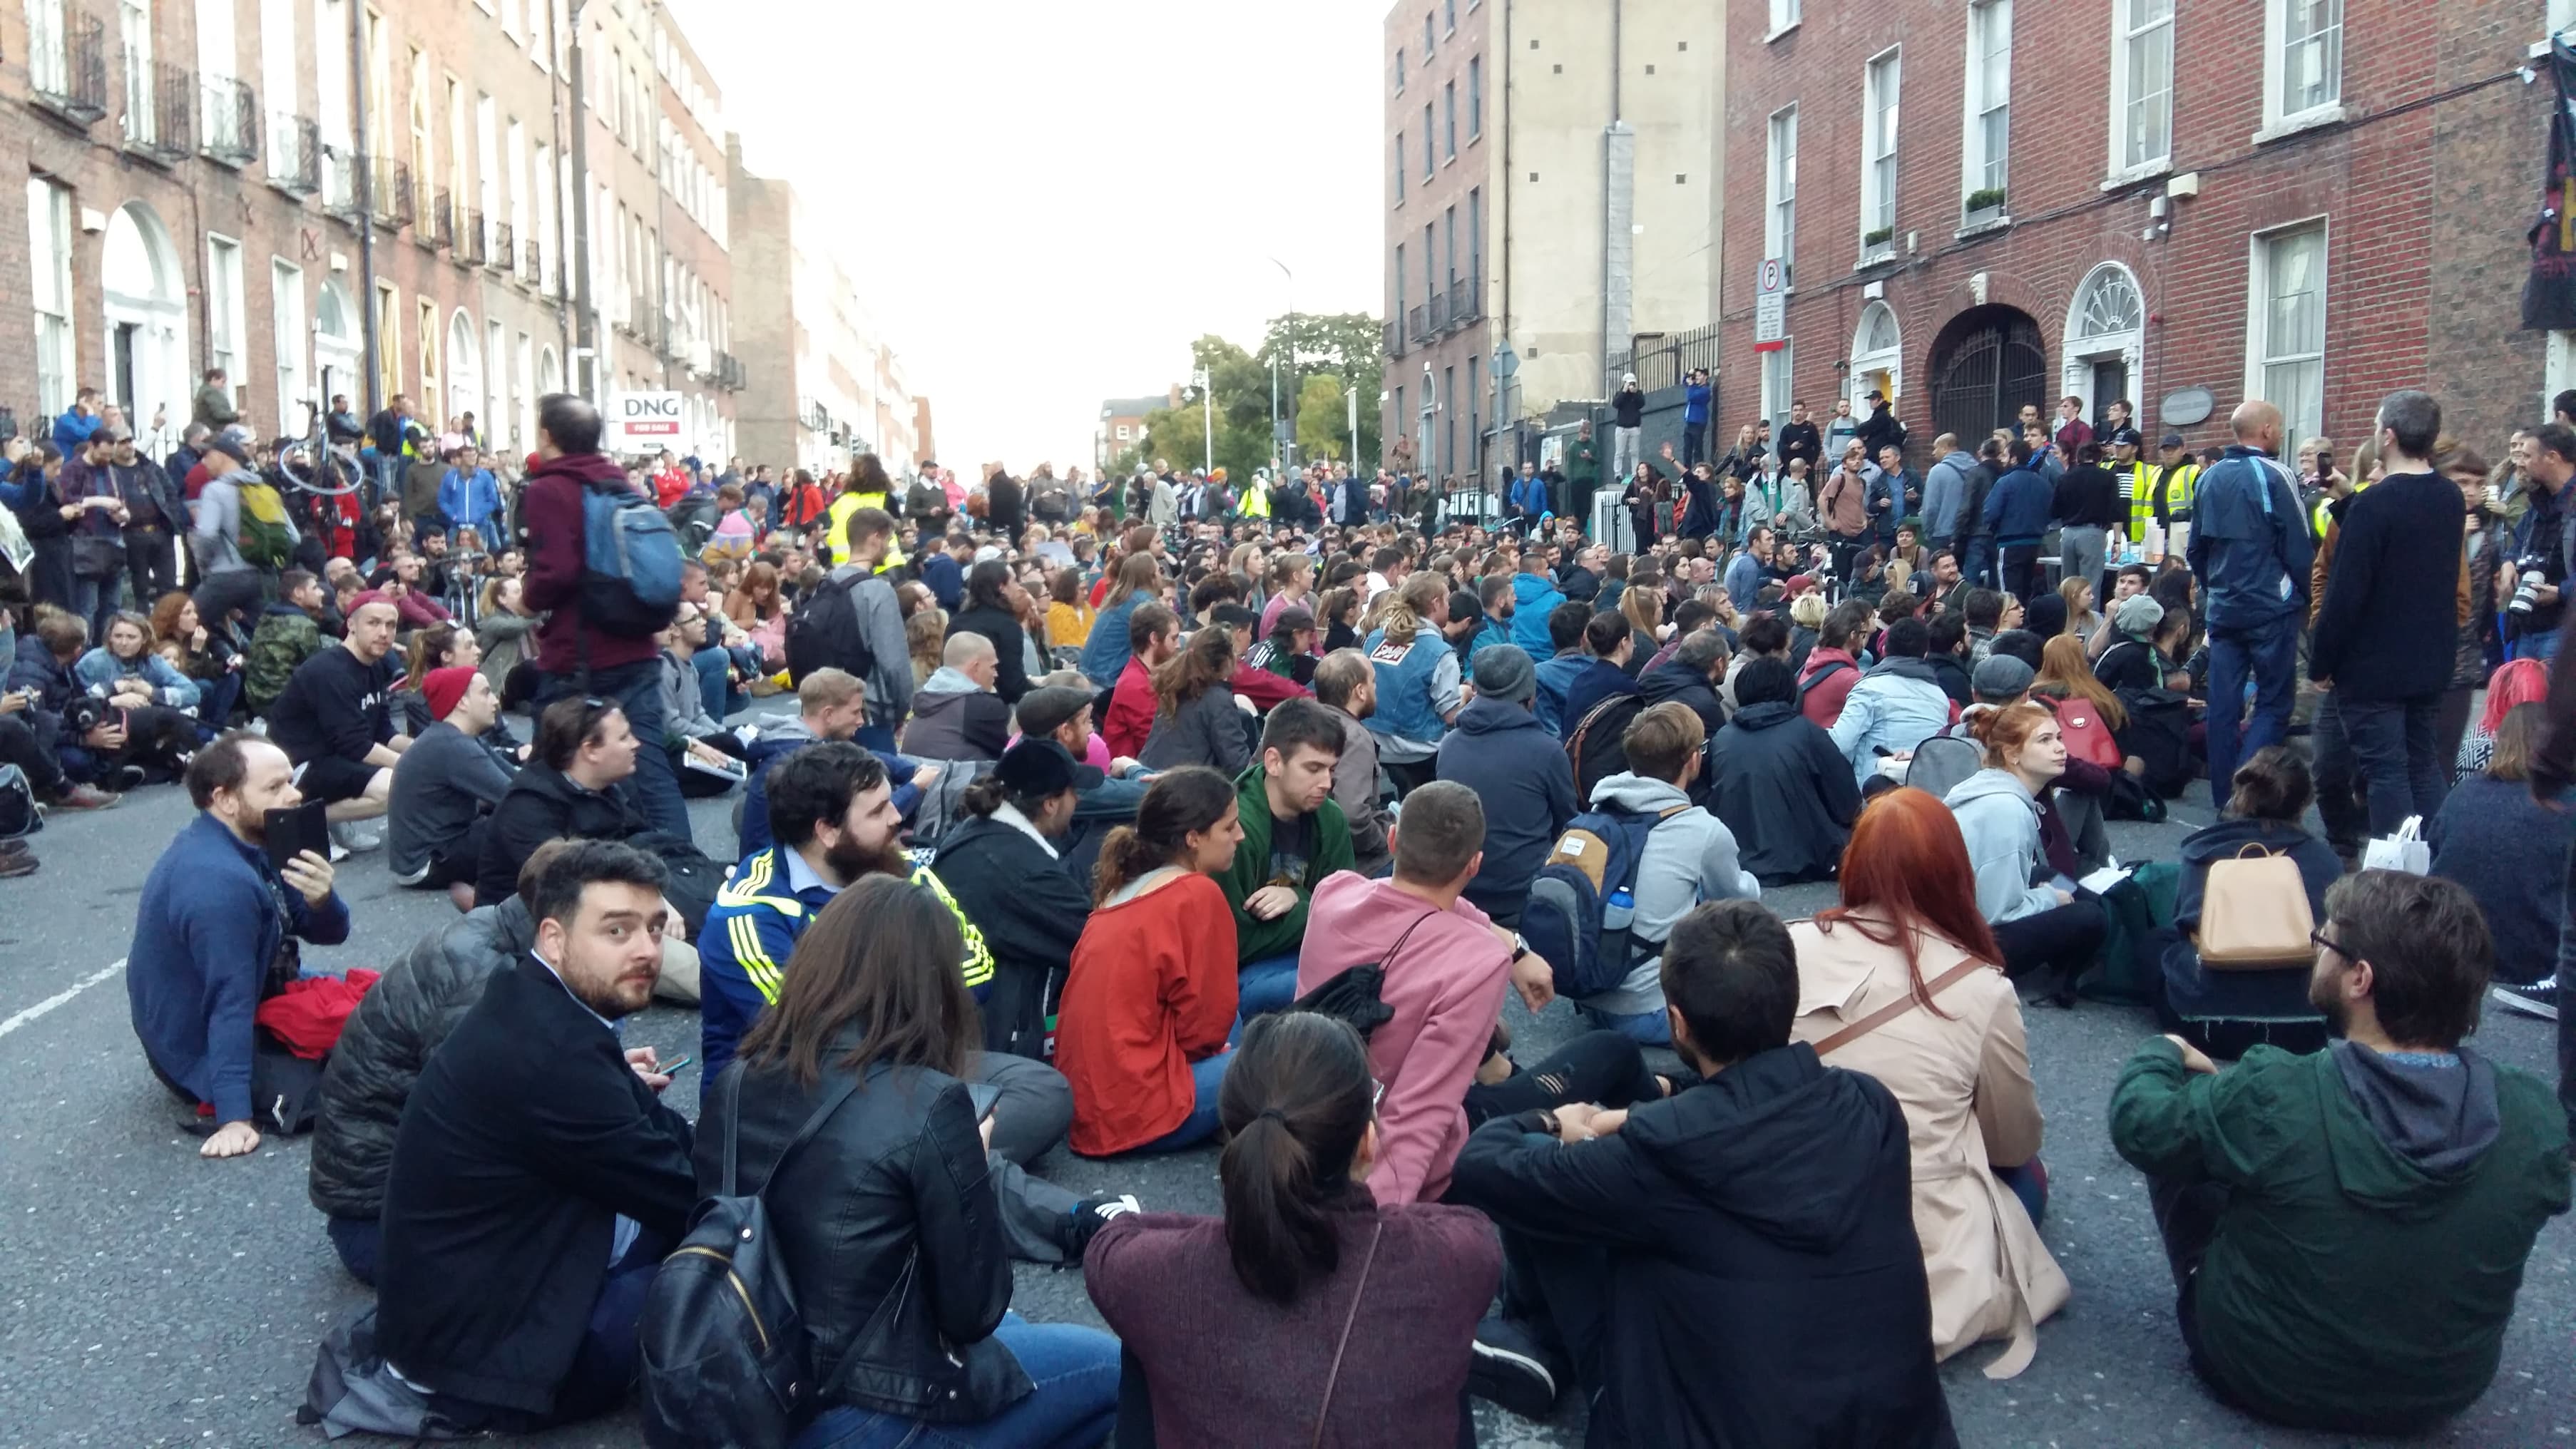 Civil liberties group calls for urgent report on policing at eviction of housing protesters